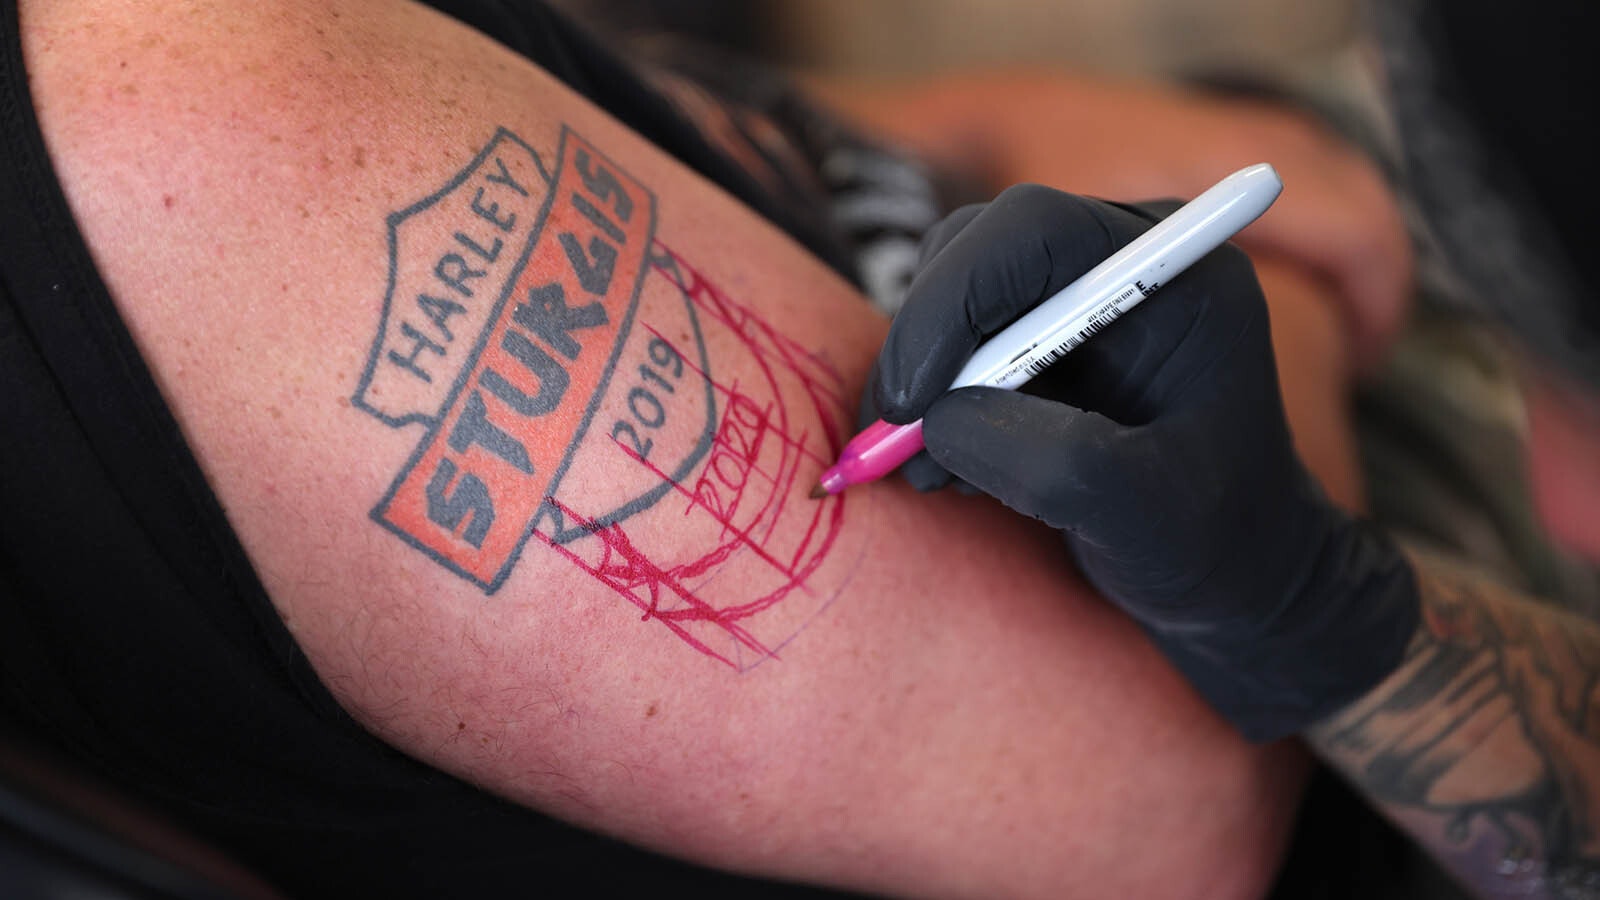 Al Nelsen of Kelsey, Washington, gets his Sturgis tattoo updated by Tim Martin at Fat Cats Tattoos during the 81st annual Sturgis Motorcycle Rally in 2021.